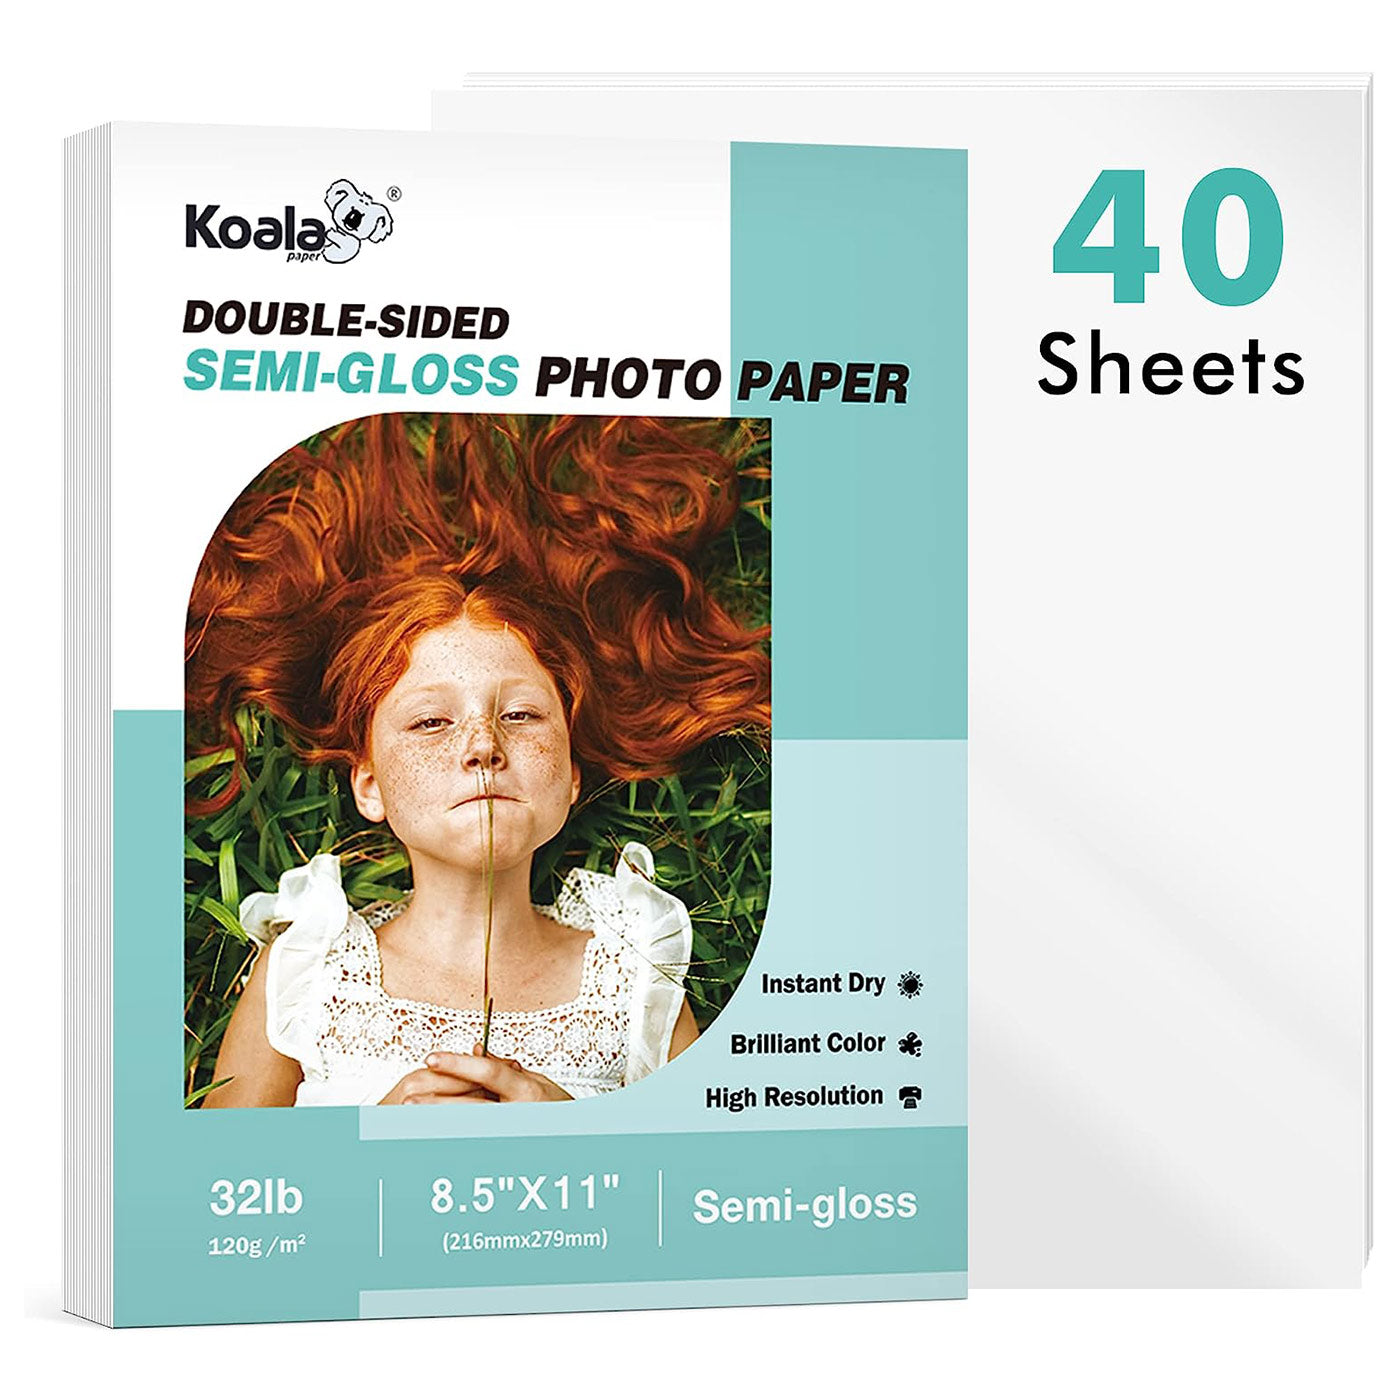 Koala Thin Double Sided Semi-Gloss Photo Paper 8.5X11 Inches 40 Sheets Compatible with Inkjet and Laser Printer 32lb 120gsm